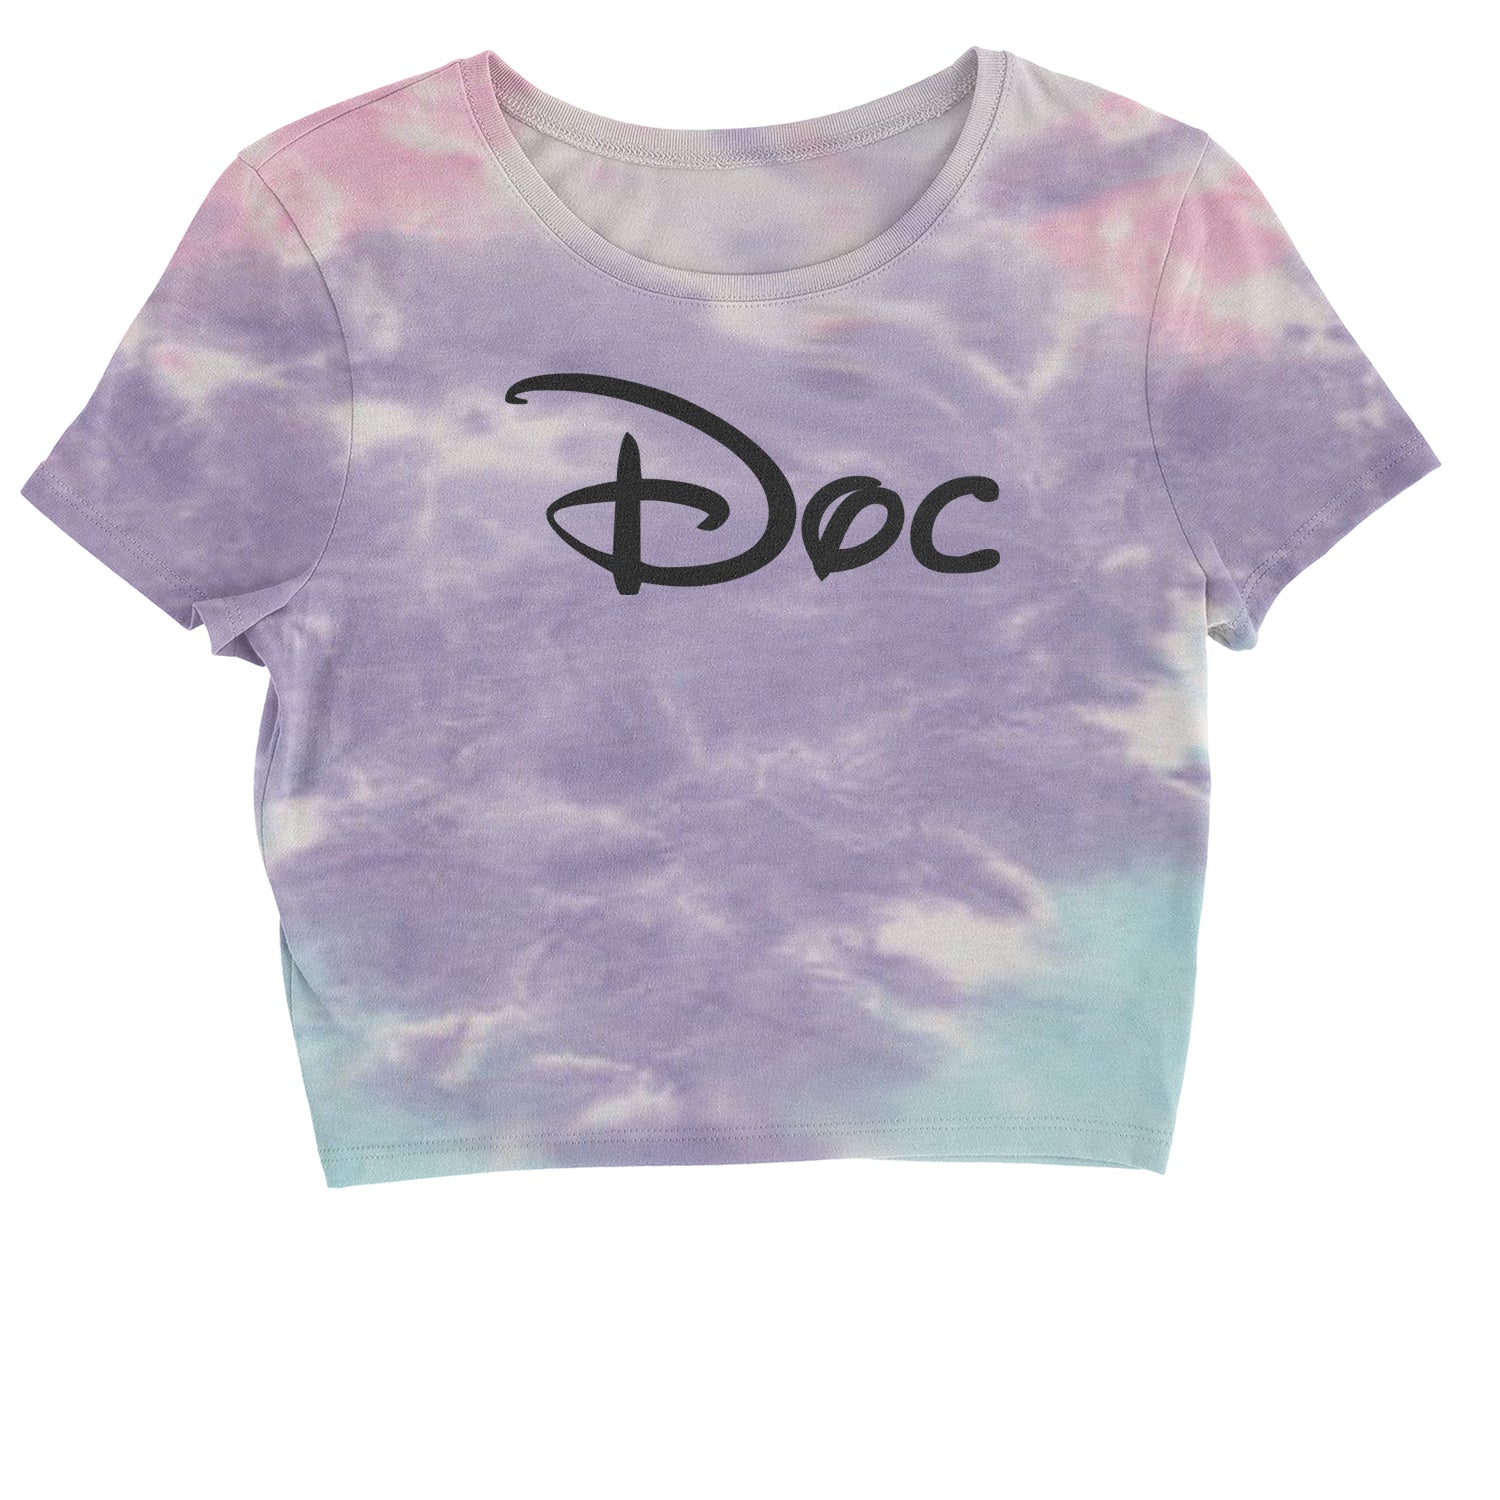 Doc - 7 Dwarfs Costume Cropped T-Shirt and, costume, dwarfs, group, halloween, matching, seven, snow, the, white by Expression Tees